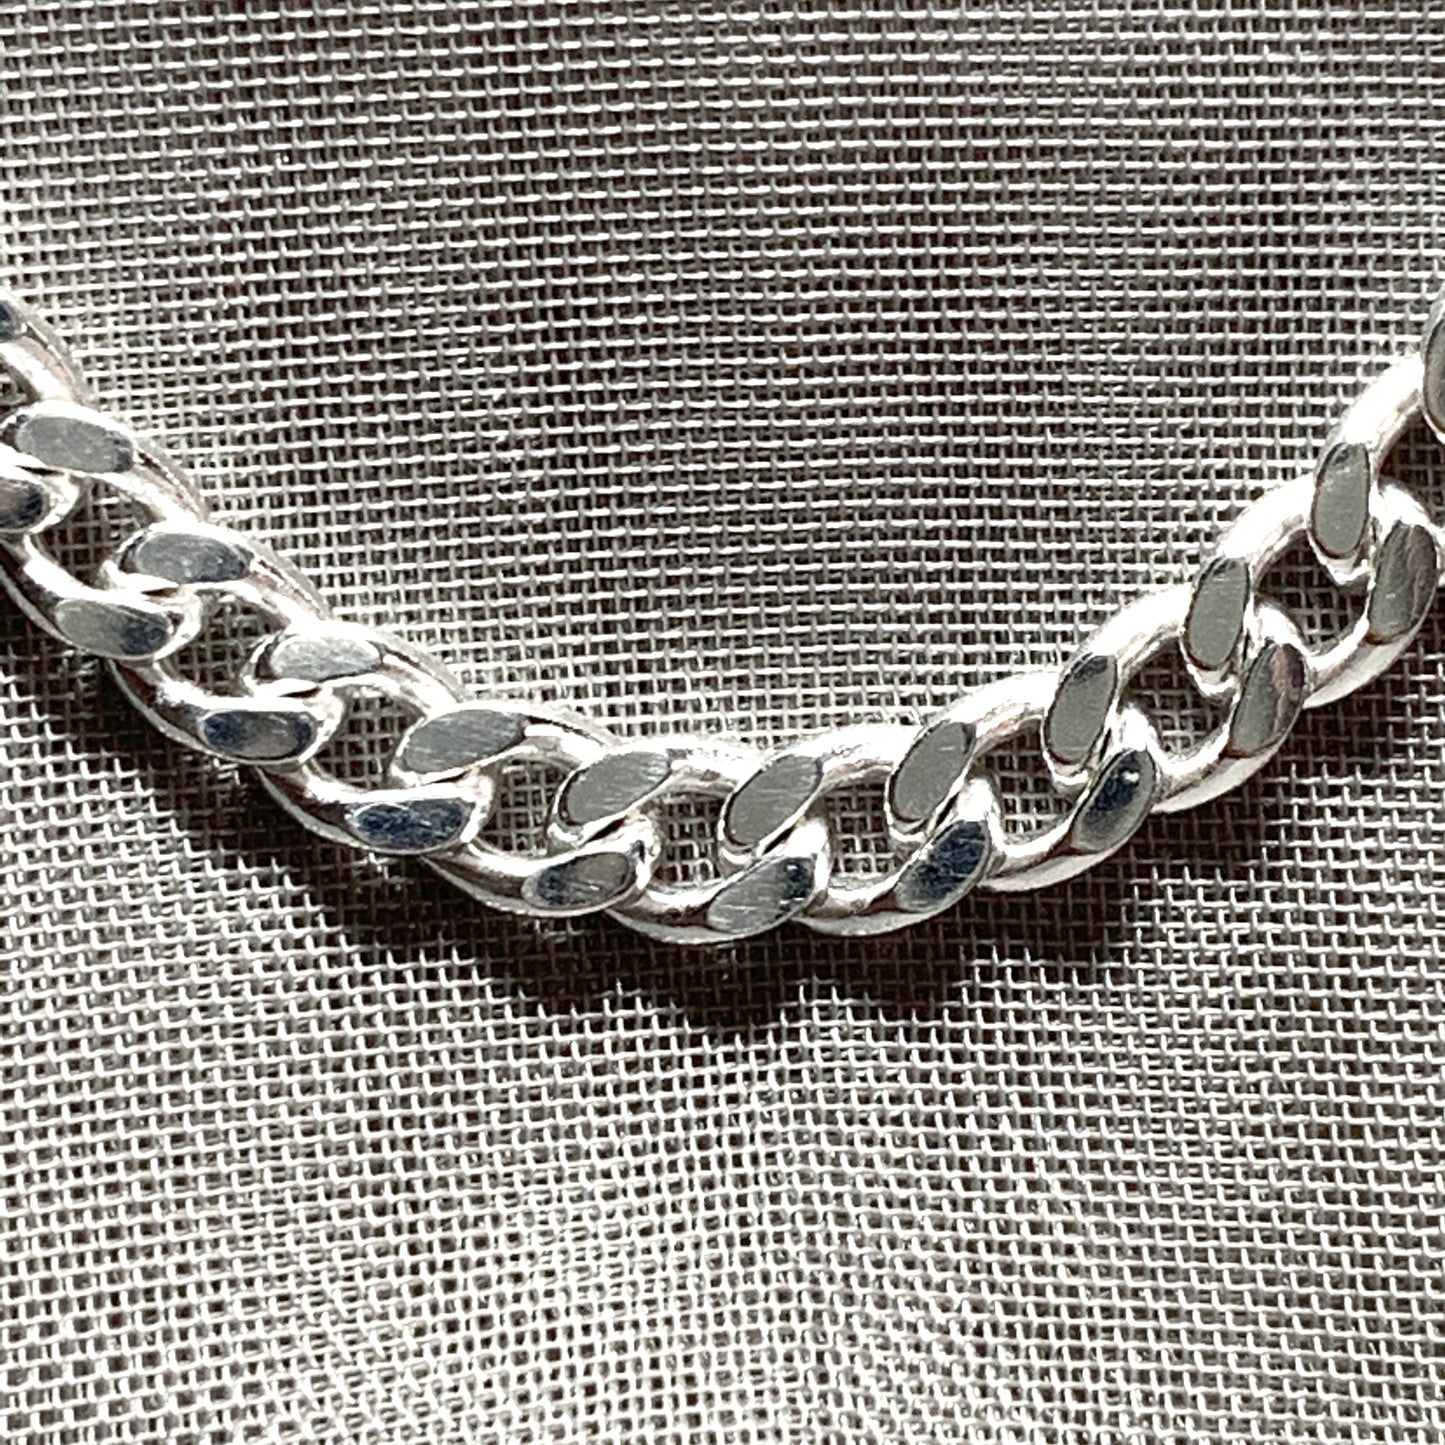 Mens solid sterling silver curb necklace